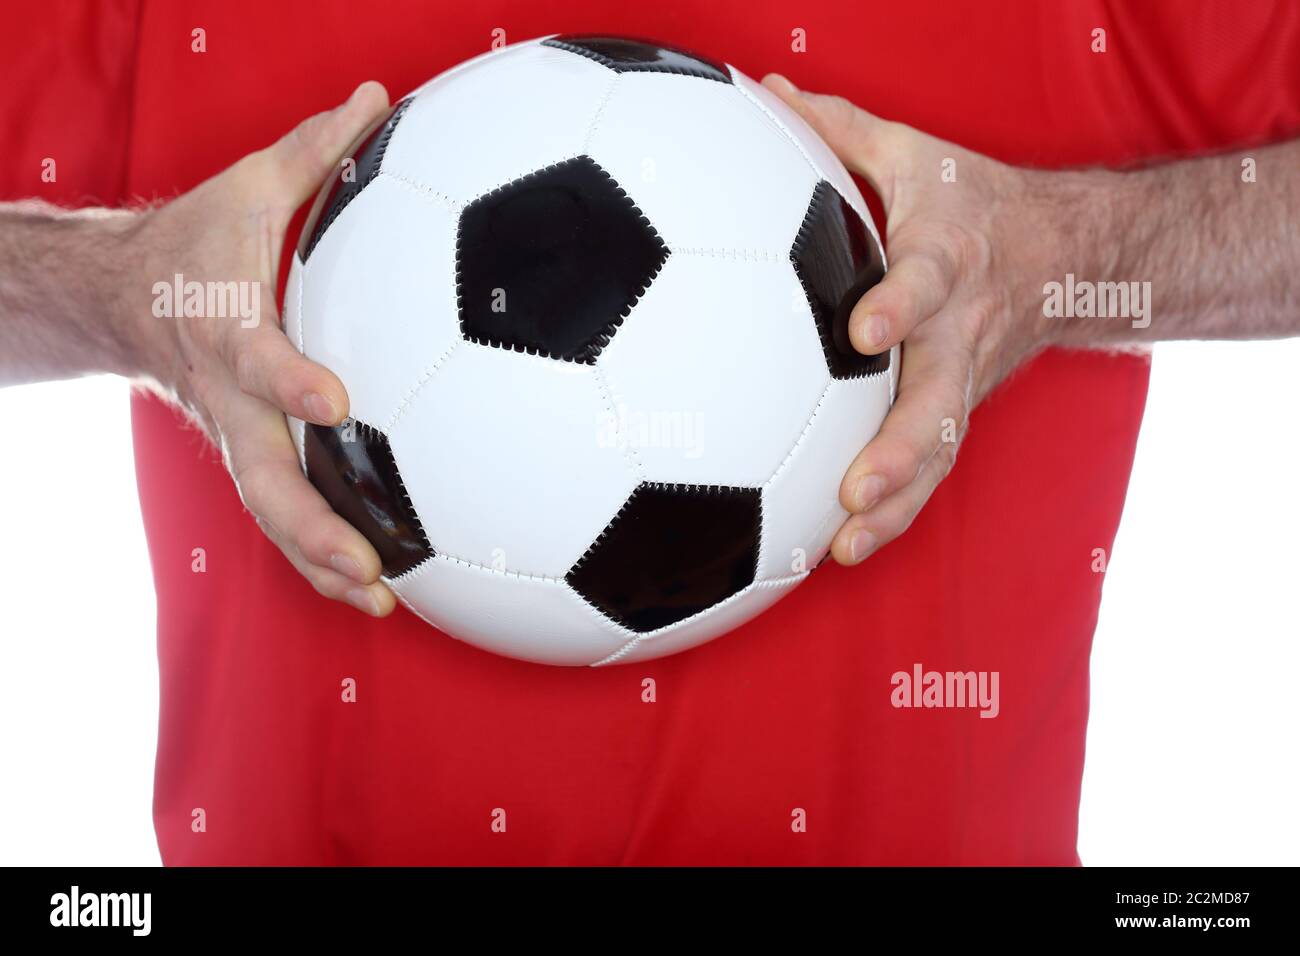 keeper with red shirt is holding a soccer ball Stock Photo